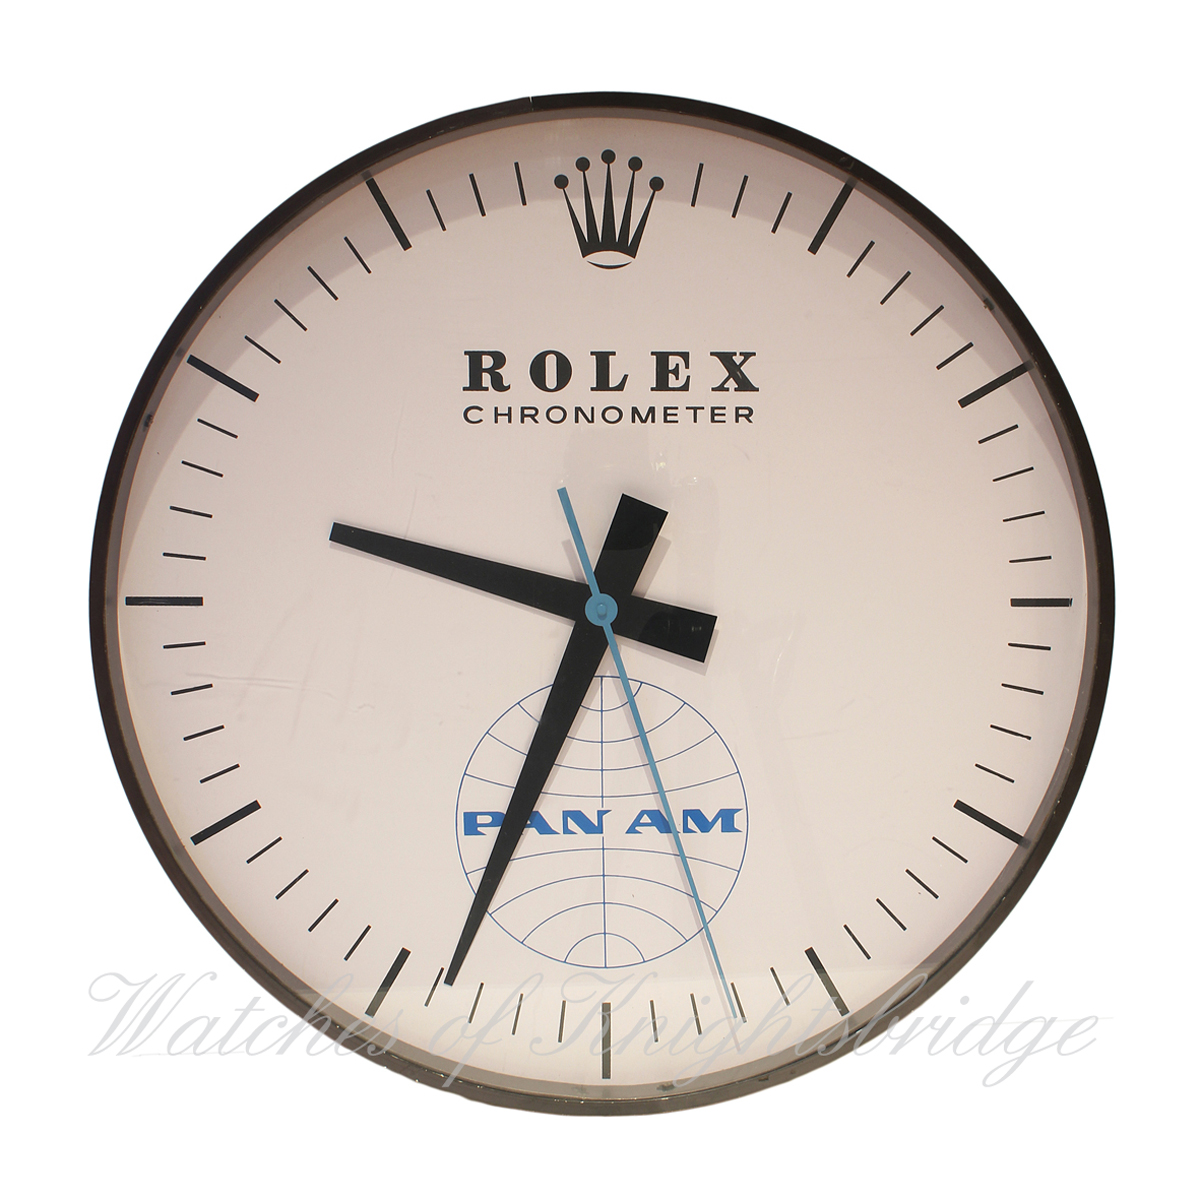 A RARE ROLEX CHRONOMETER PAM AM AIRLINES ELECTRIC WALL CLOCK CIRCA 1970 BY HANOVER MANUFACTURING